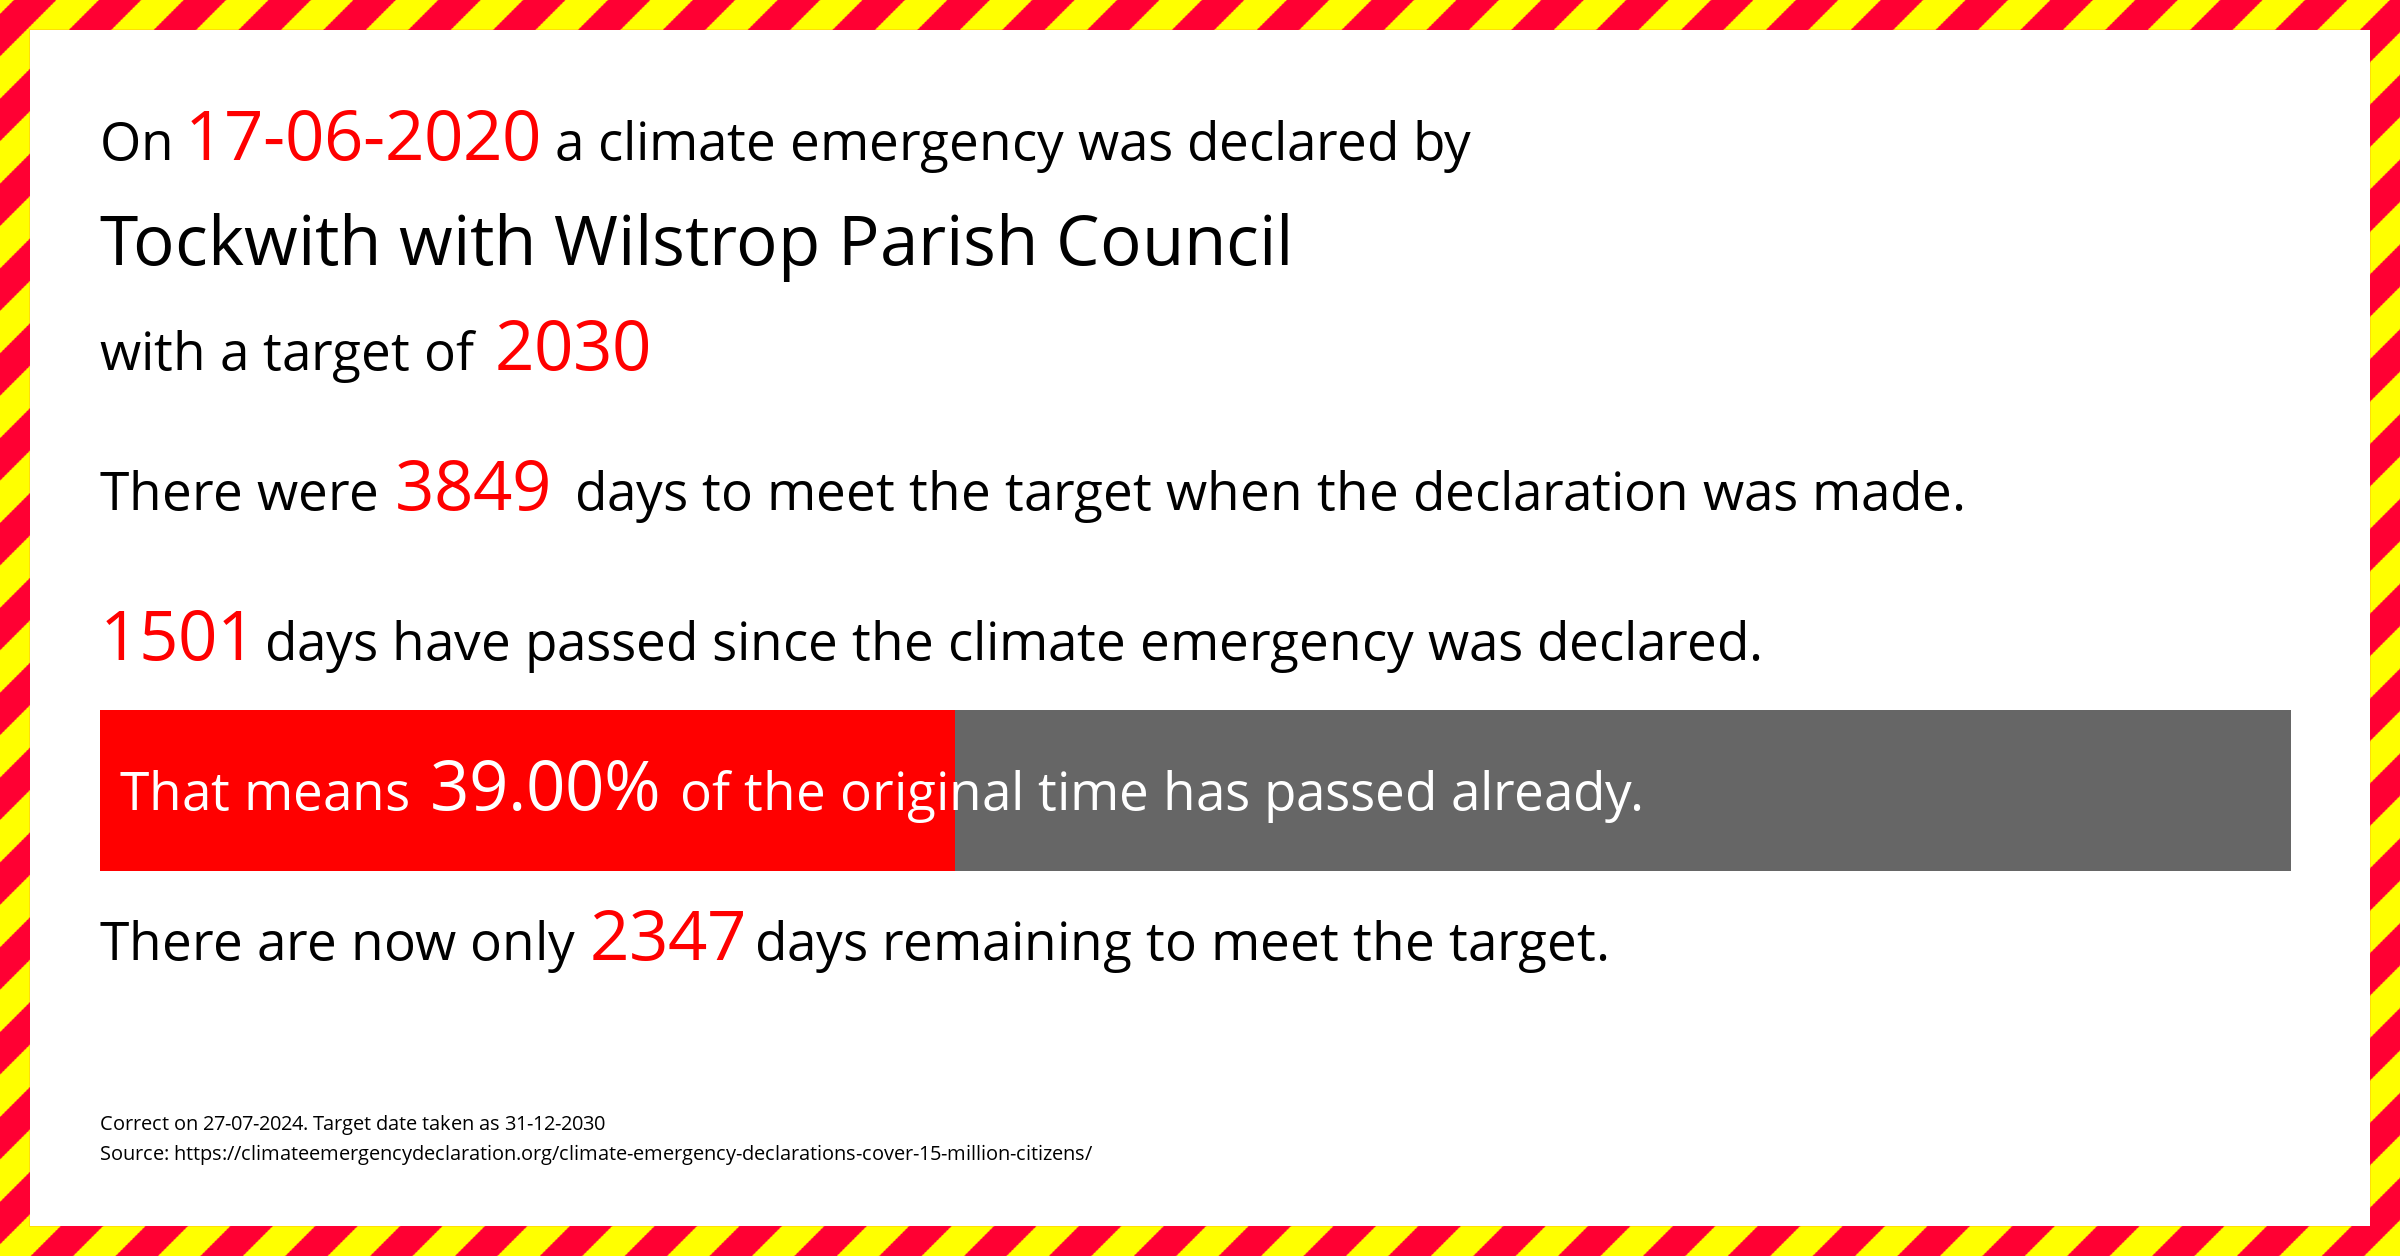 Tockwith with Wilstrop Parish Council  declared a Climate emergency on Wednesday 17th June 2020, with a target of 2030.